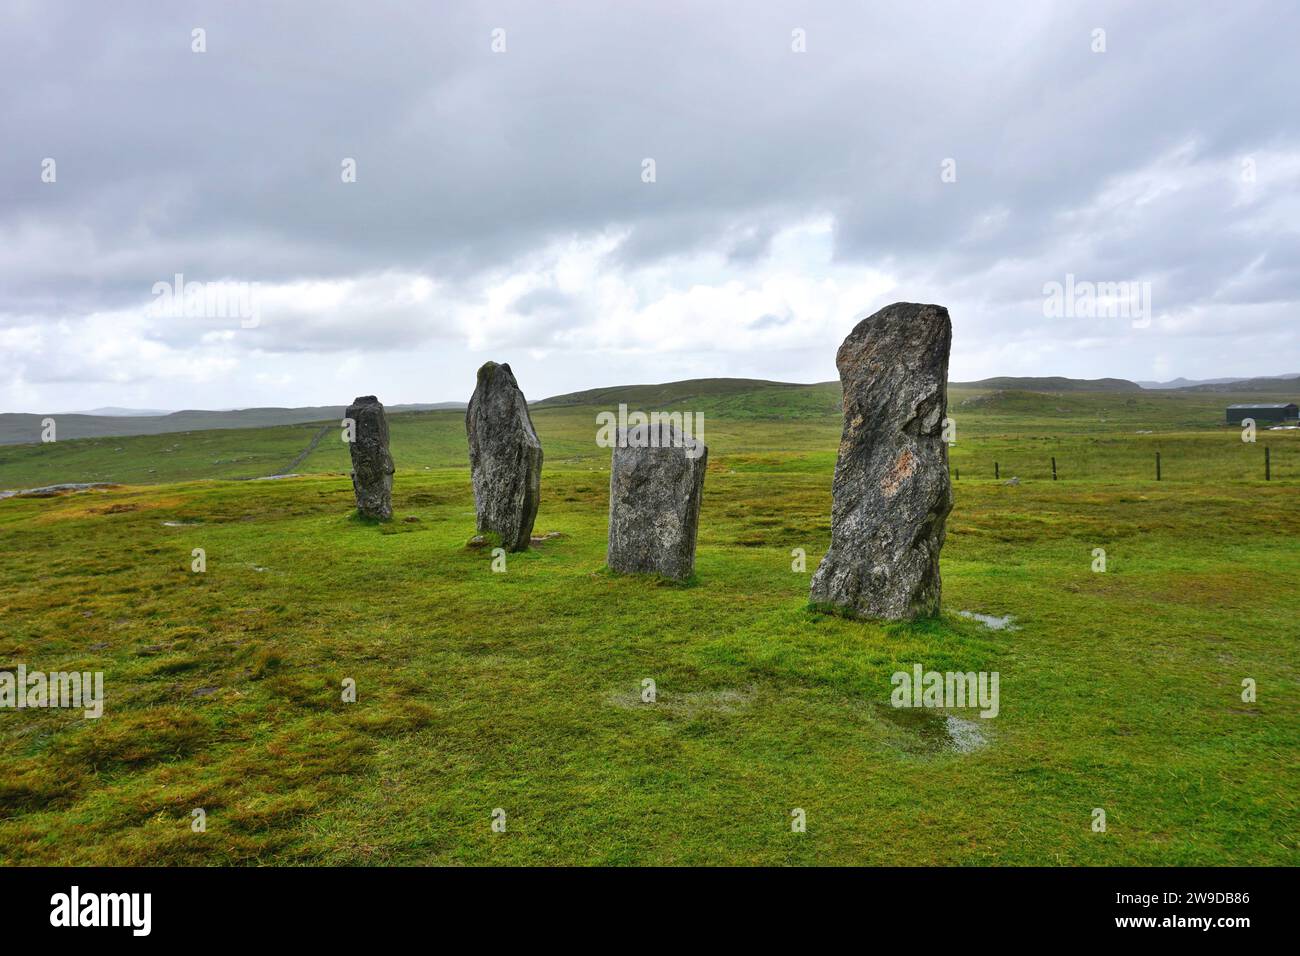 A quartet of ancient standing stones contrast with the bright green meadow at the Callanish Neolithic site in a remote corner of Lewis Island Scotland Stock Photo